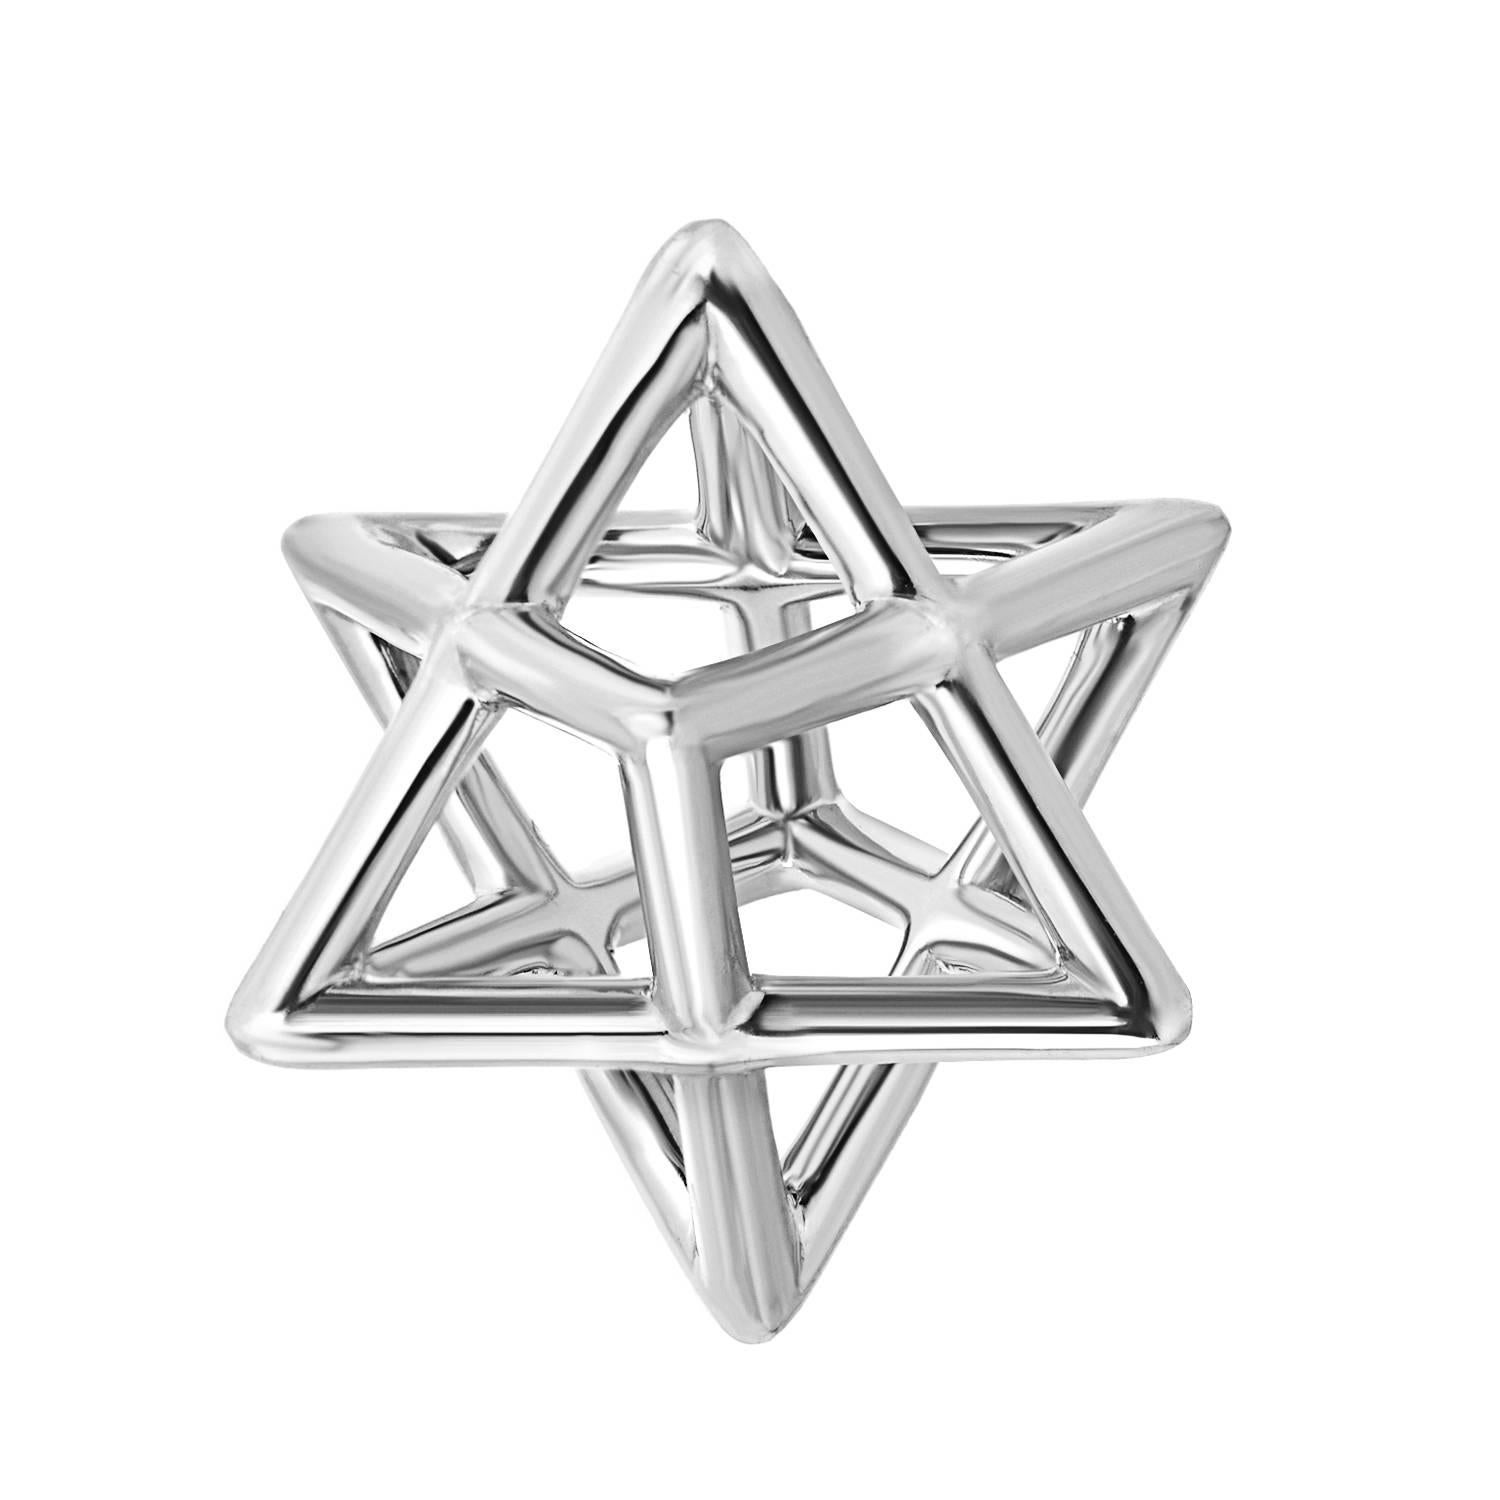 The Merkaba platinum necklace is a heirloom-quality, sacred geometric jewelry piece, highlighting superb attention to detail and extraordinary polish, symmetry and equilibrium. It suspends elegantly at the chest, measuring 0.68 inches, a